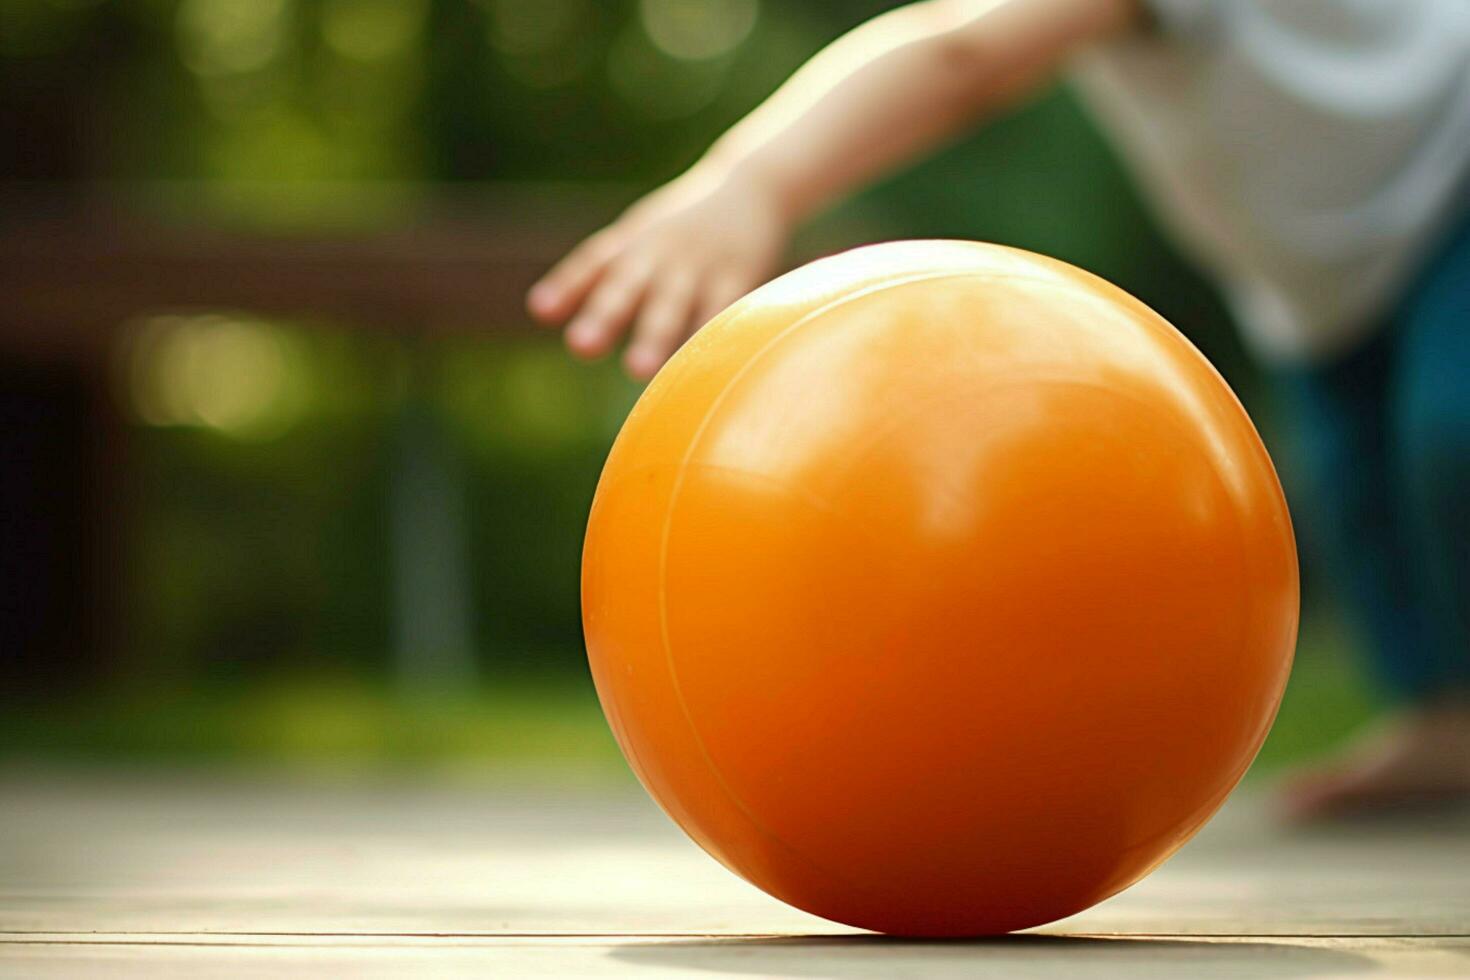 A bouncy ball for outdoor play photo